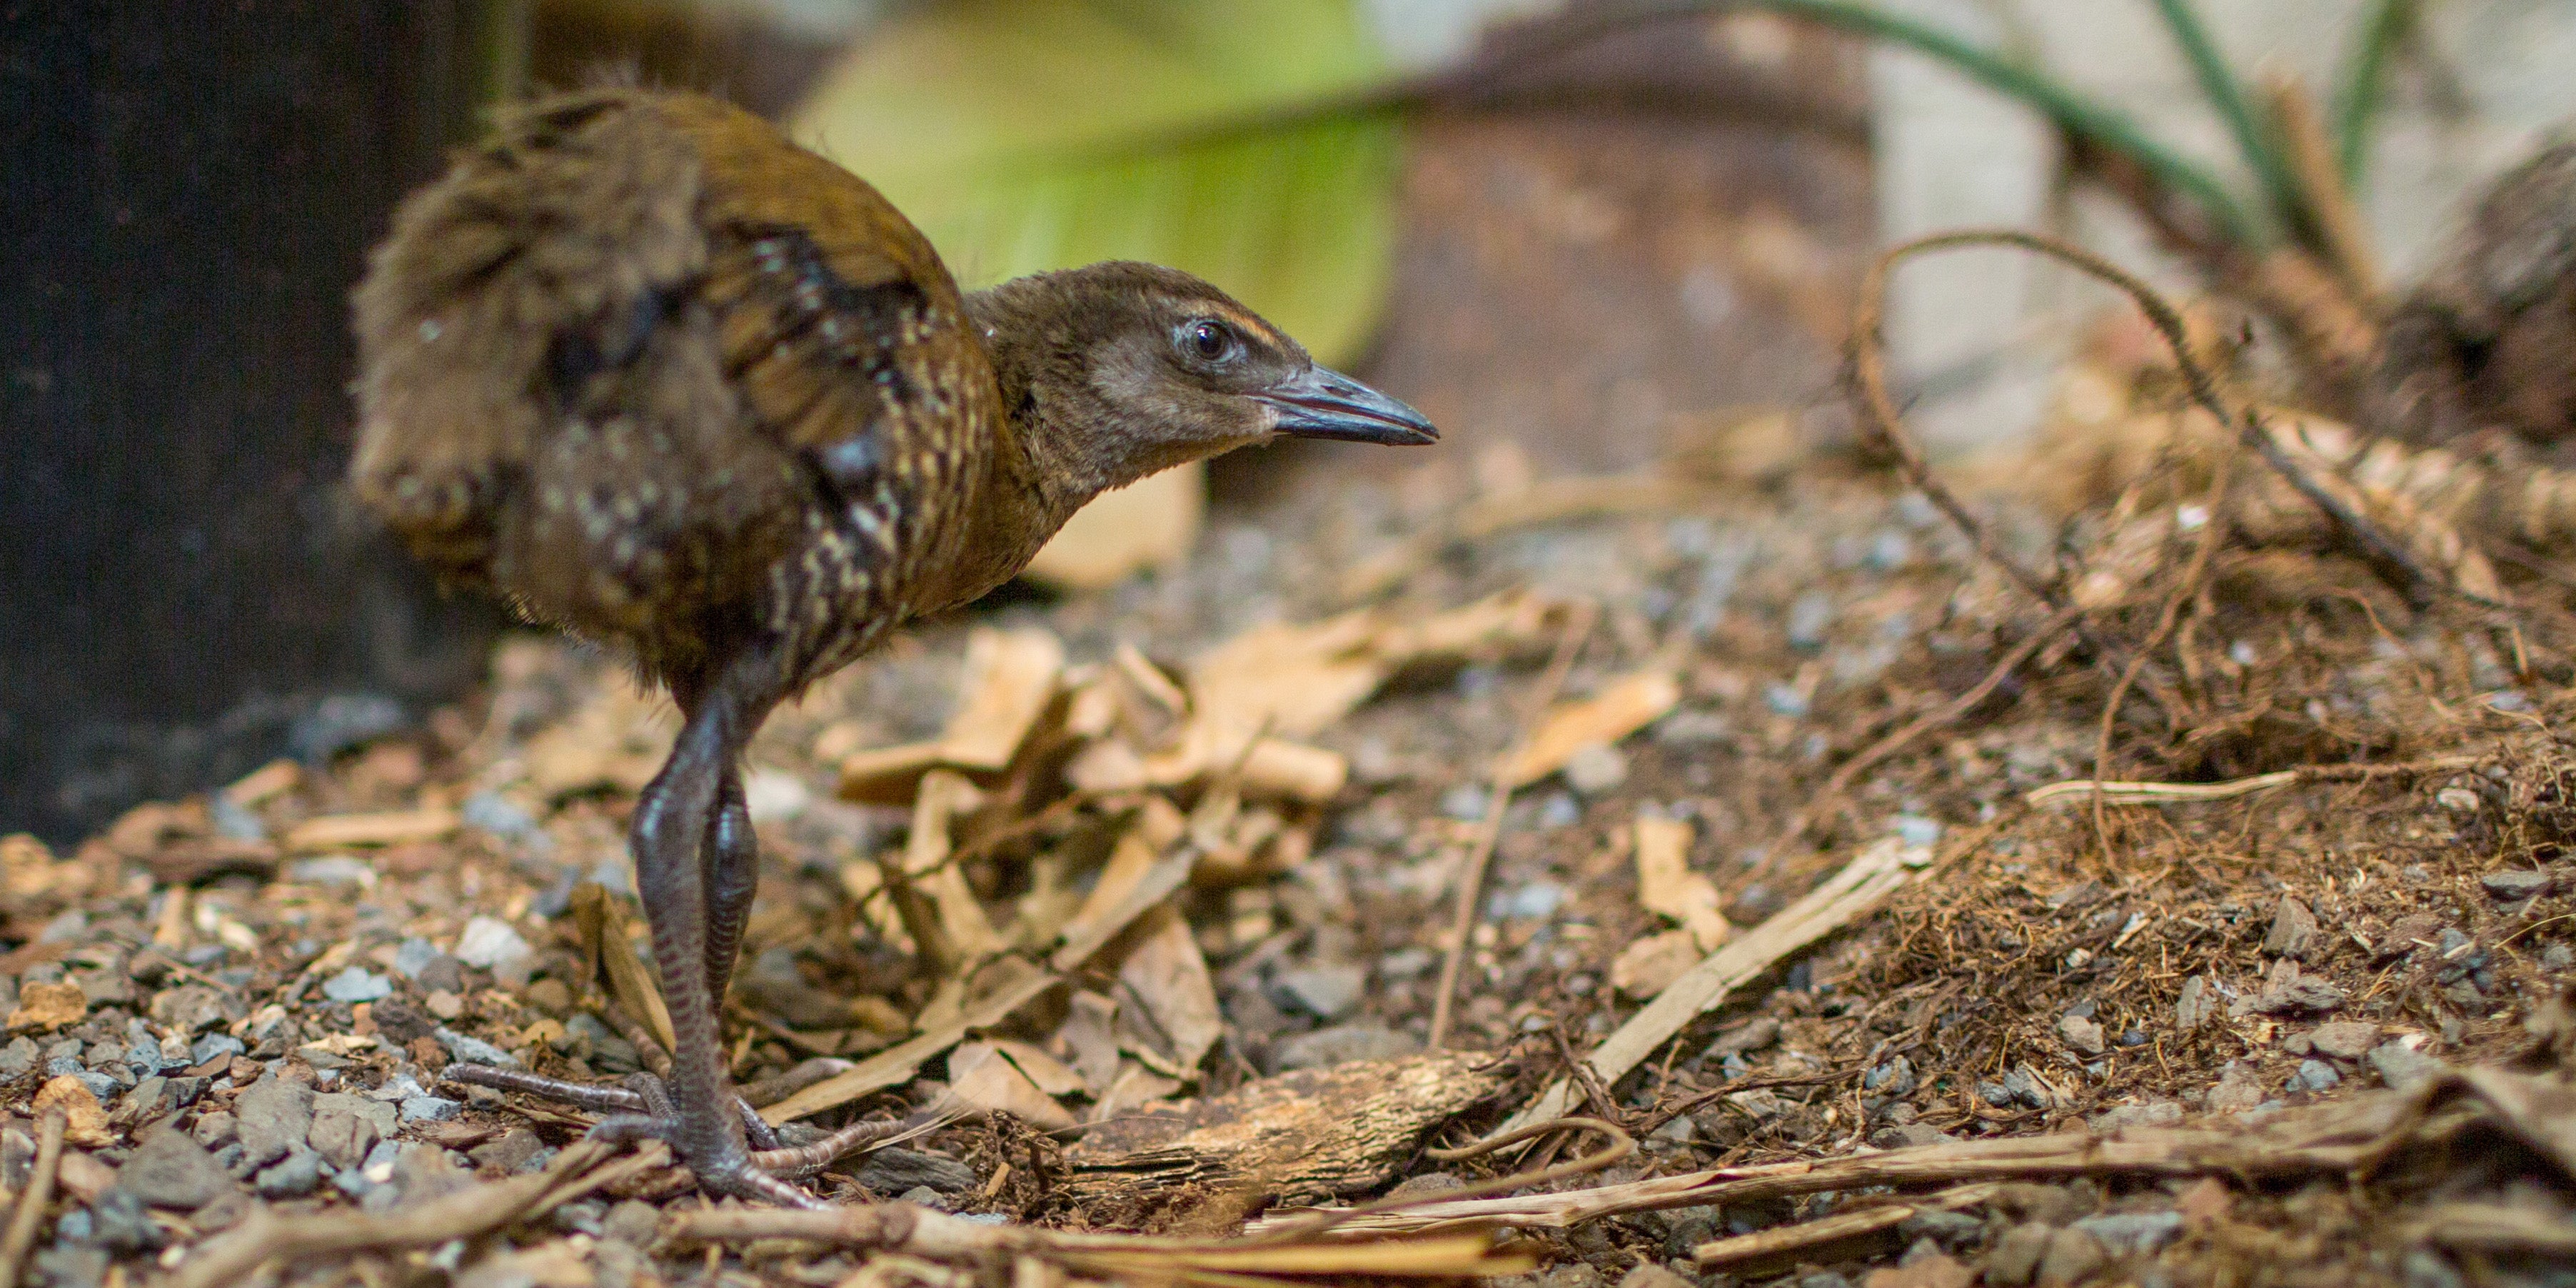 Guam rail chick at the Smithsonian Conservation Biology Institute